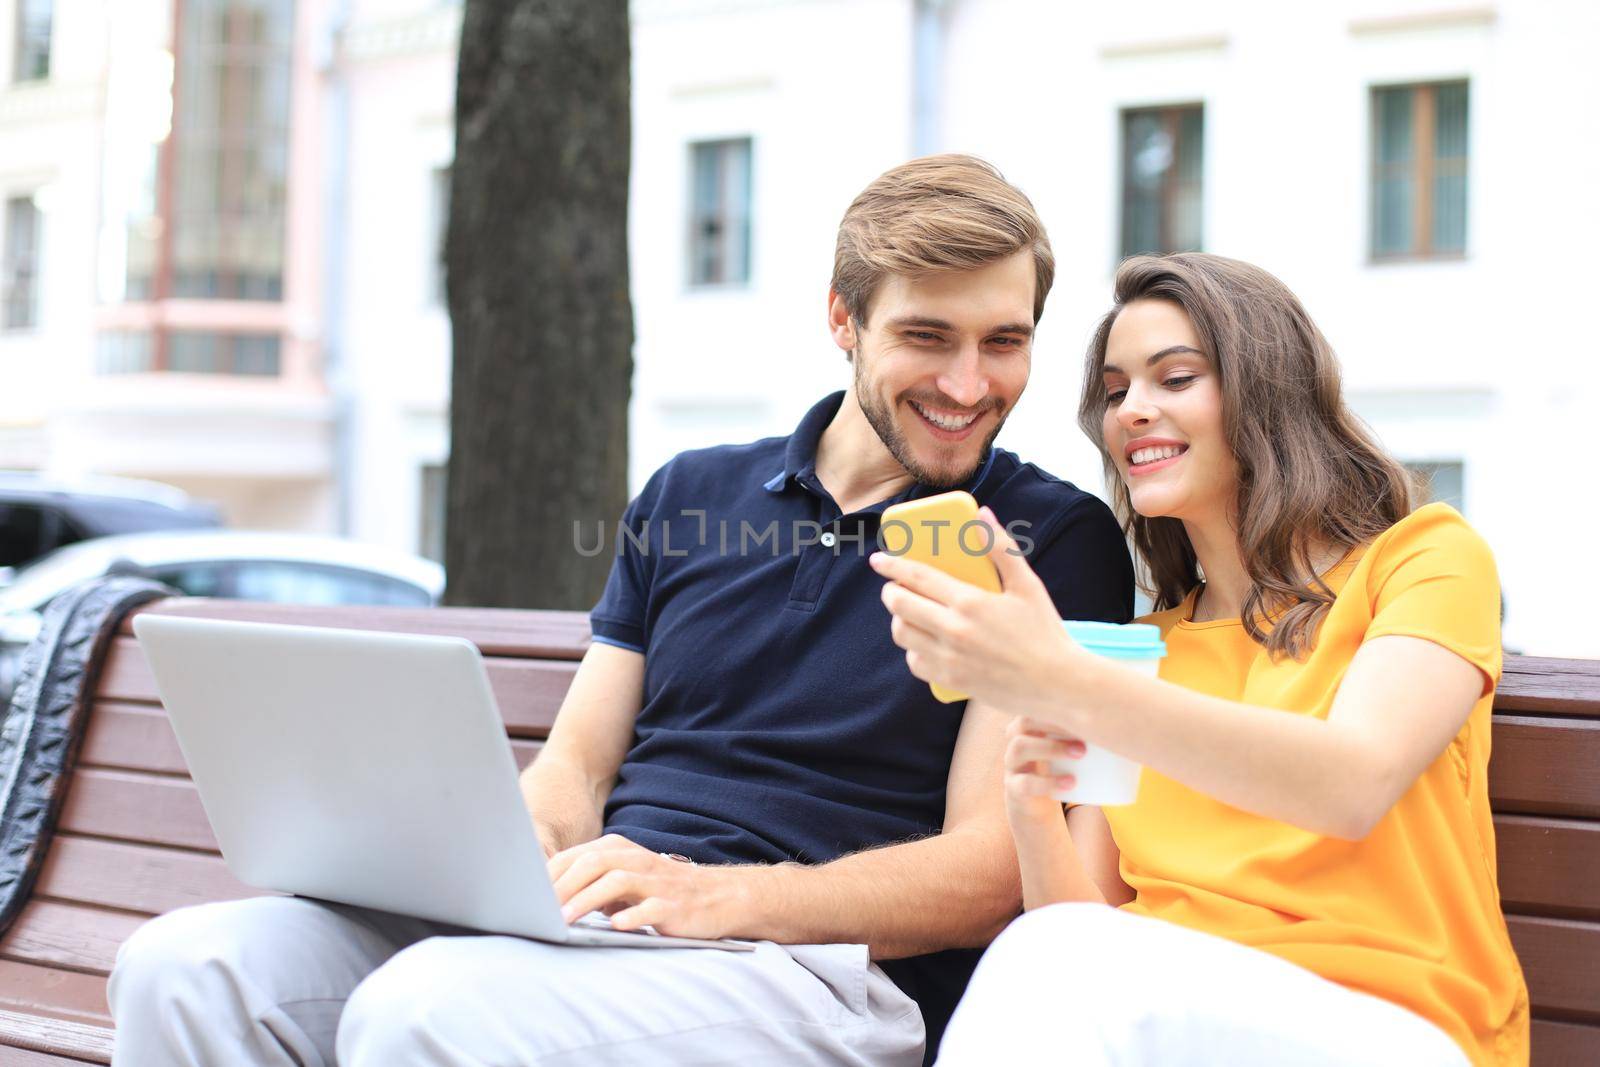 Attrative young couple using laptop computer while sitting on a bench outdoors, holding mobile phone